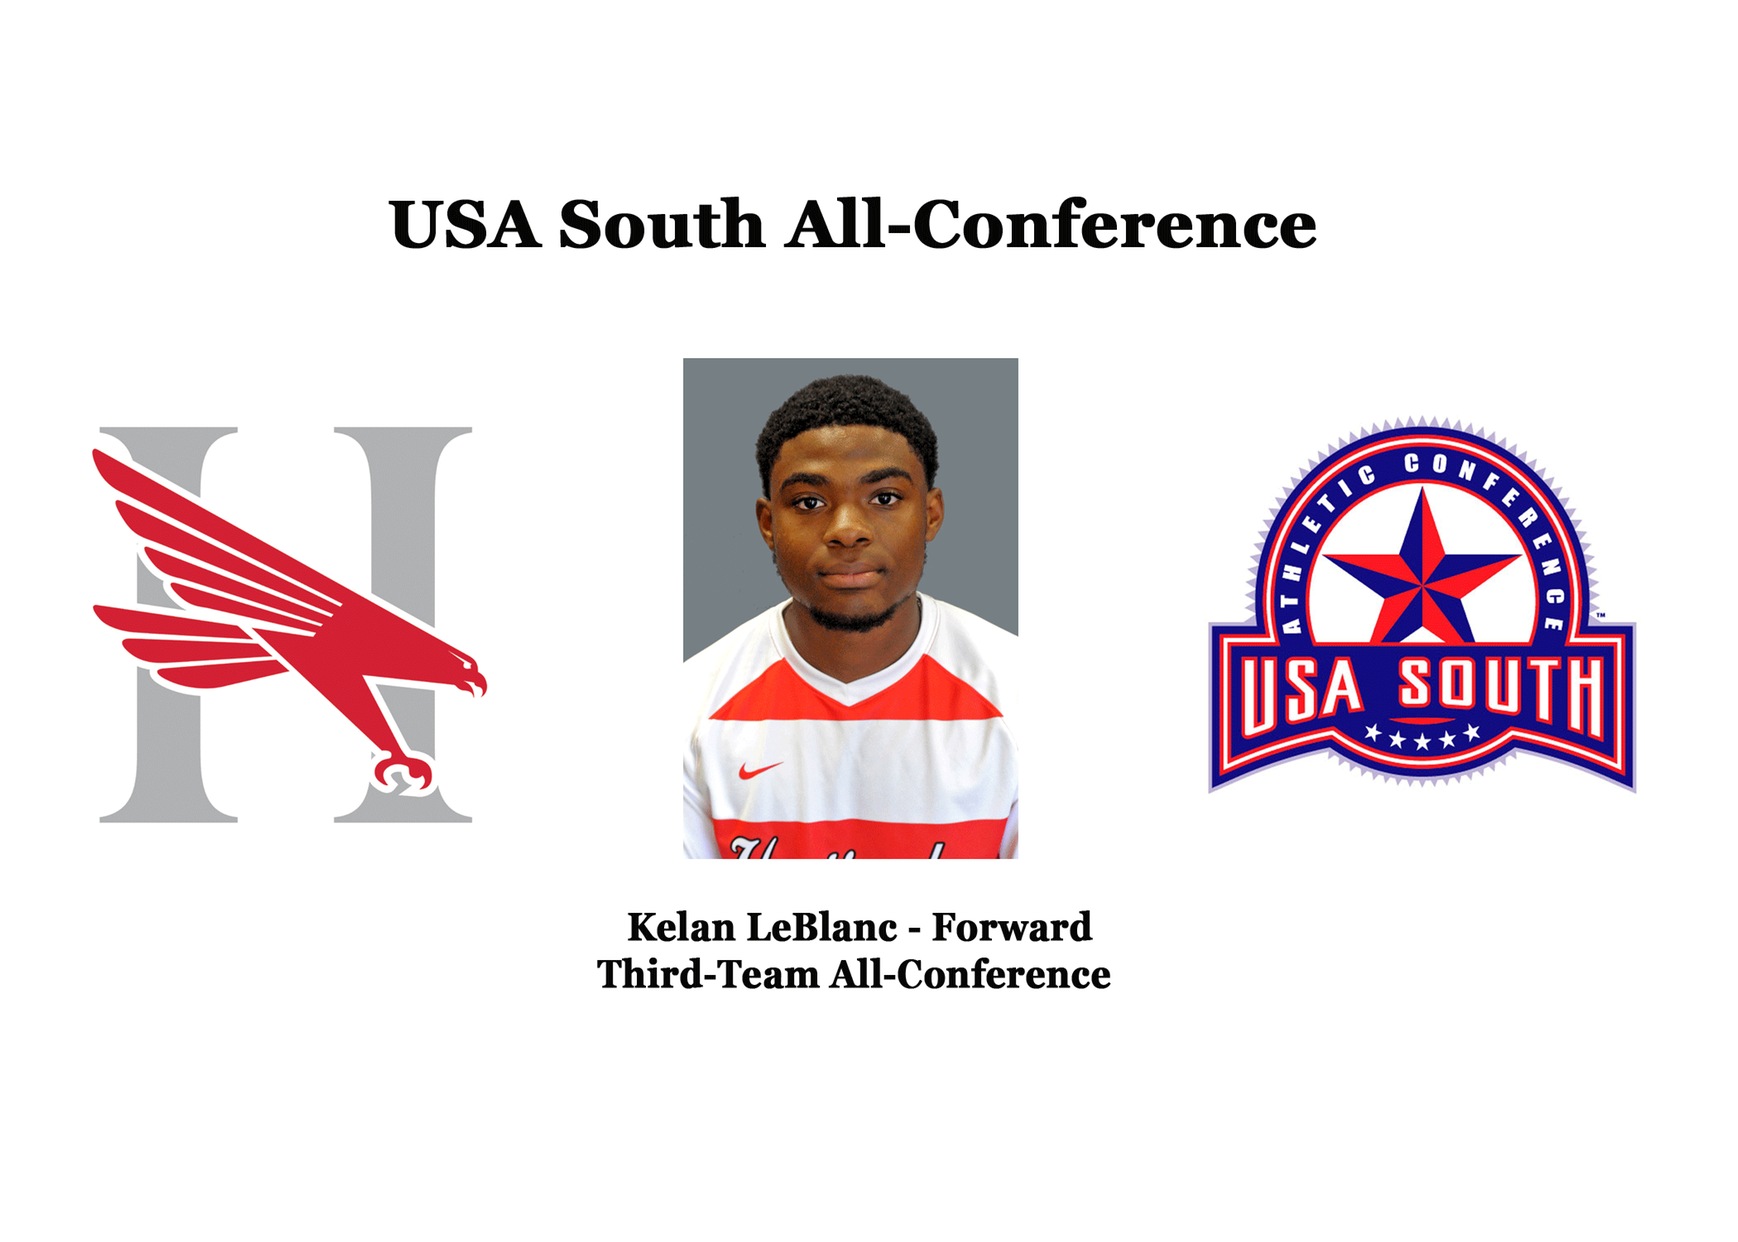 LeBlanc earns third-team All-Conference honors